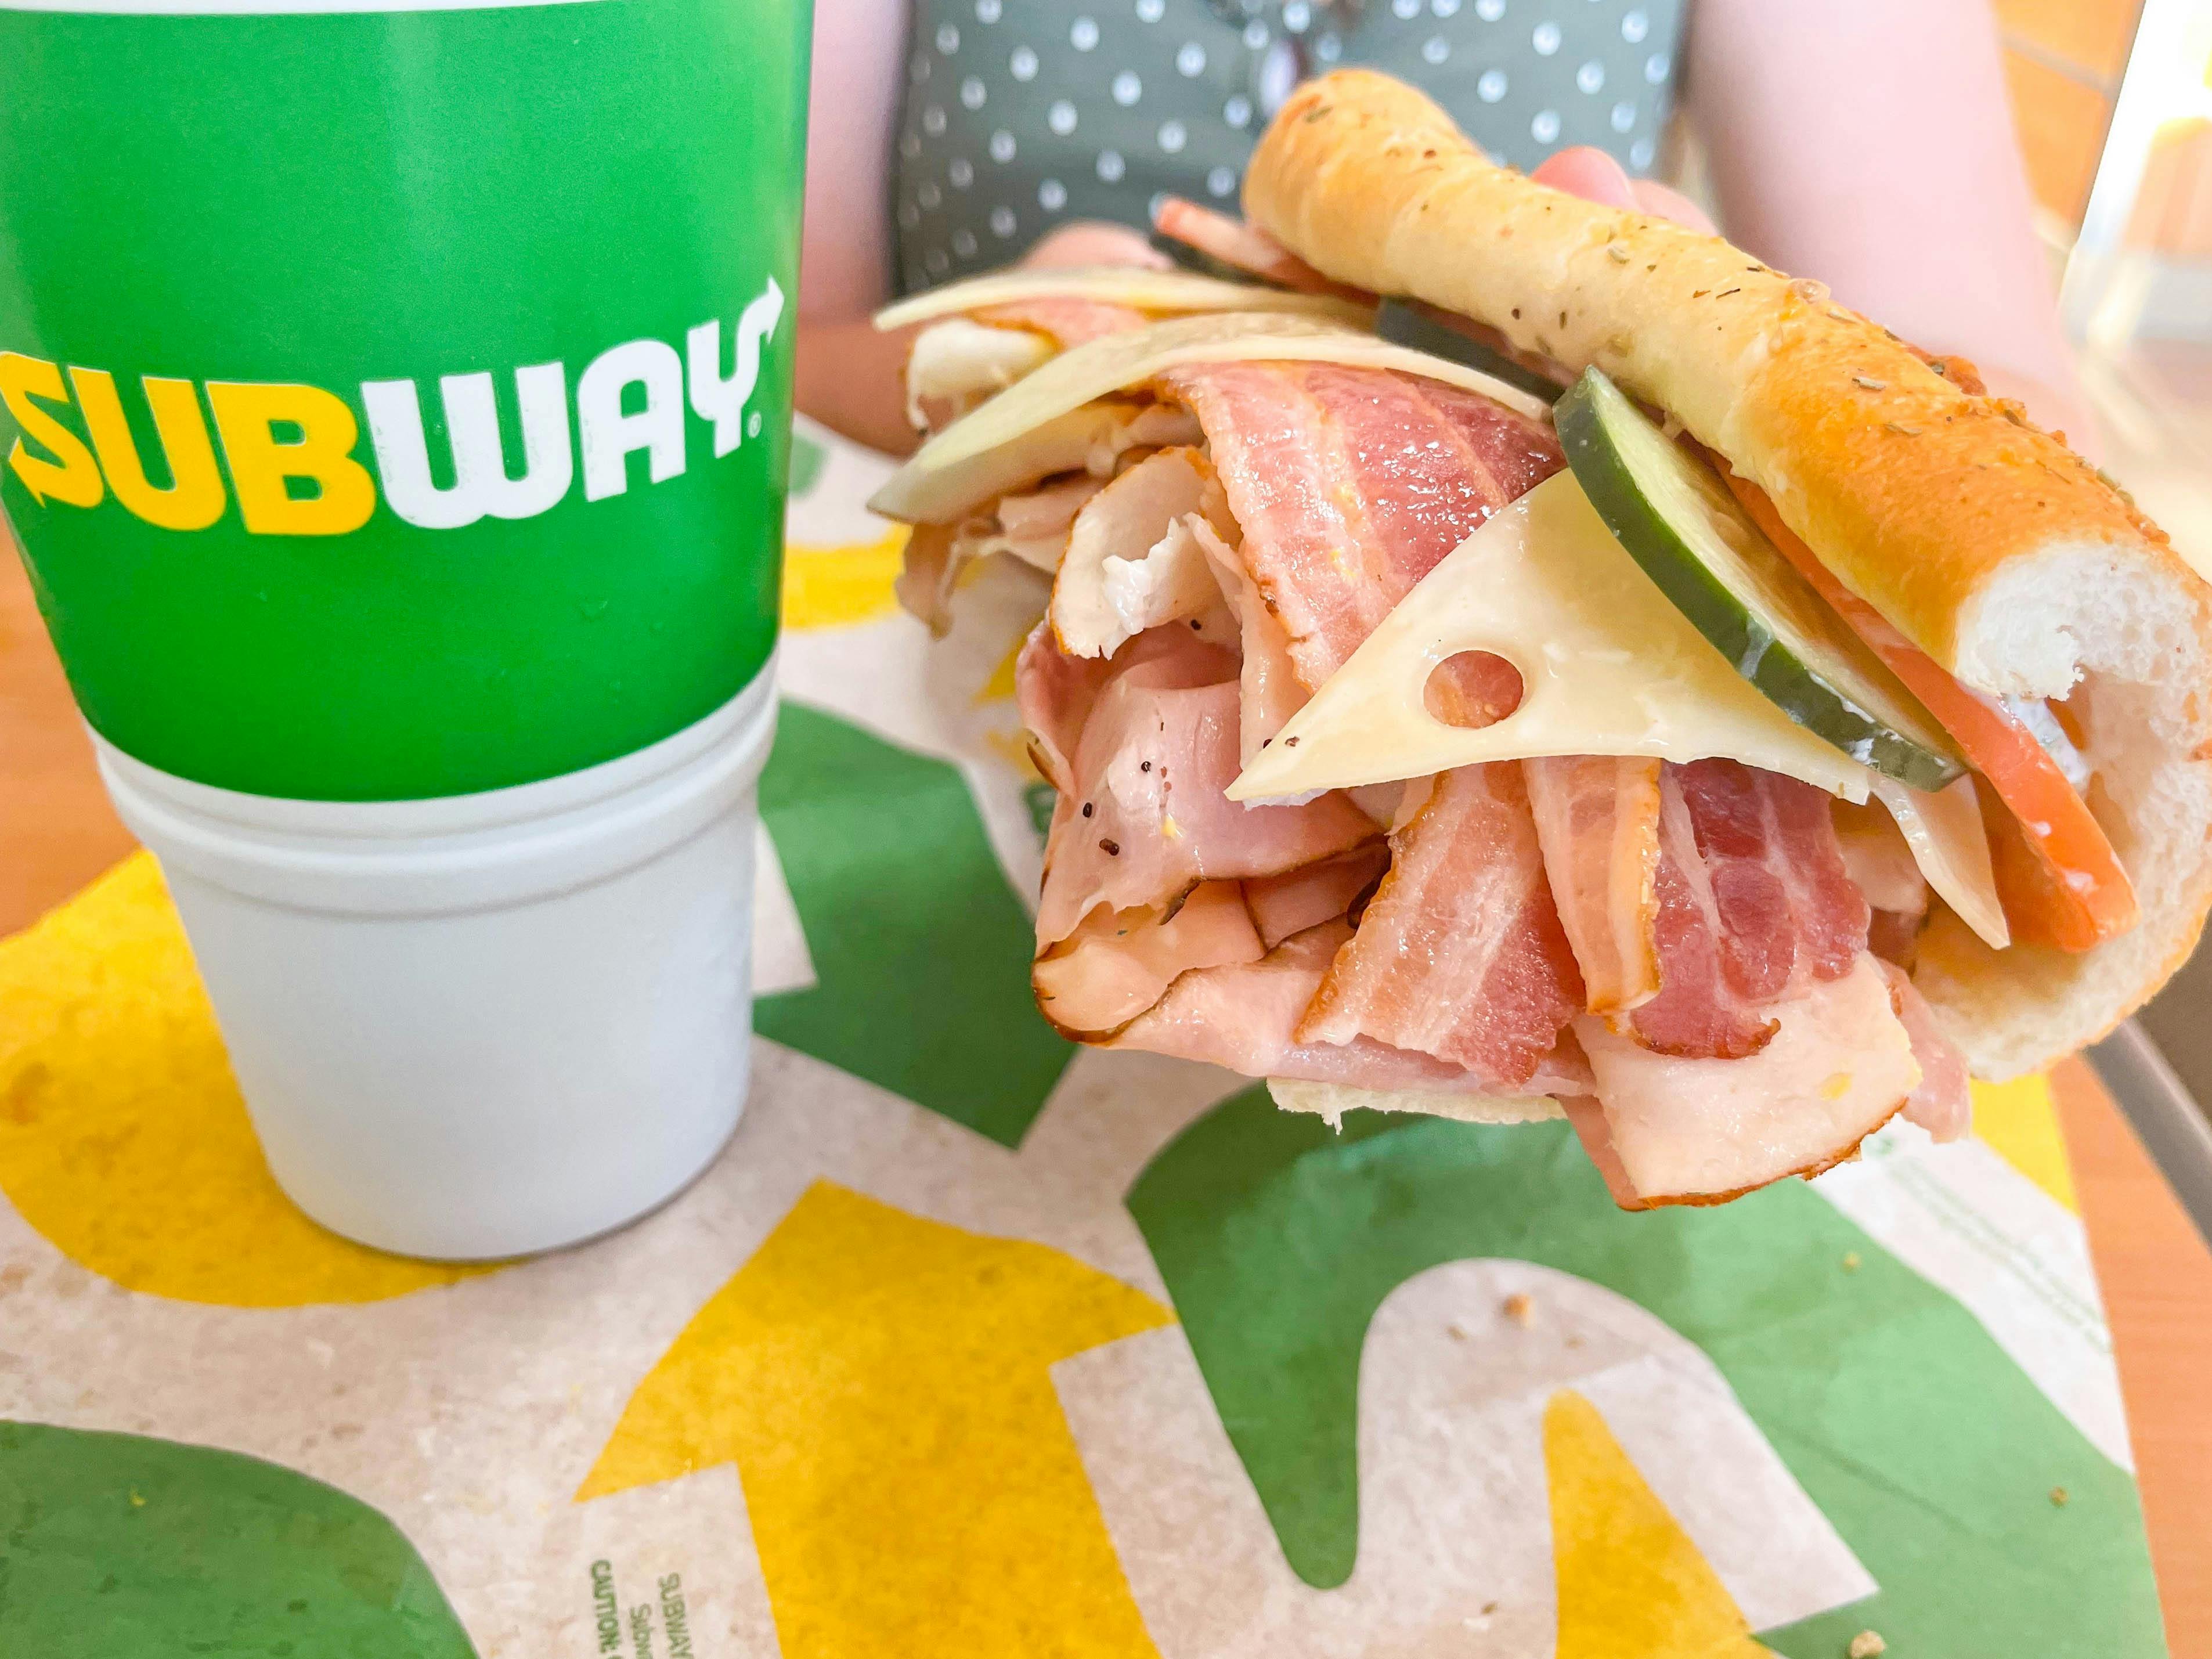 How to Get a Free 6-Inch Sandwich from Subway Next Week